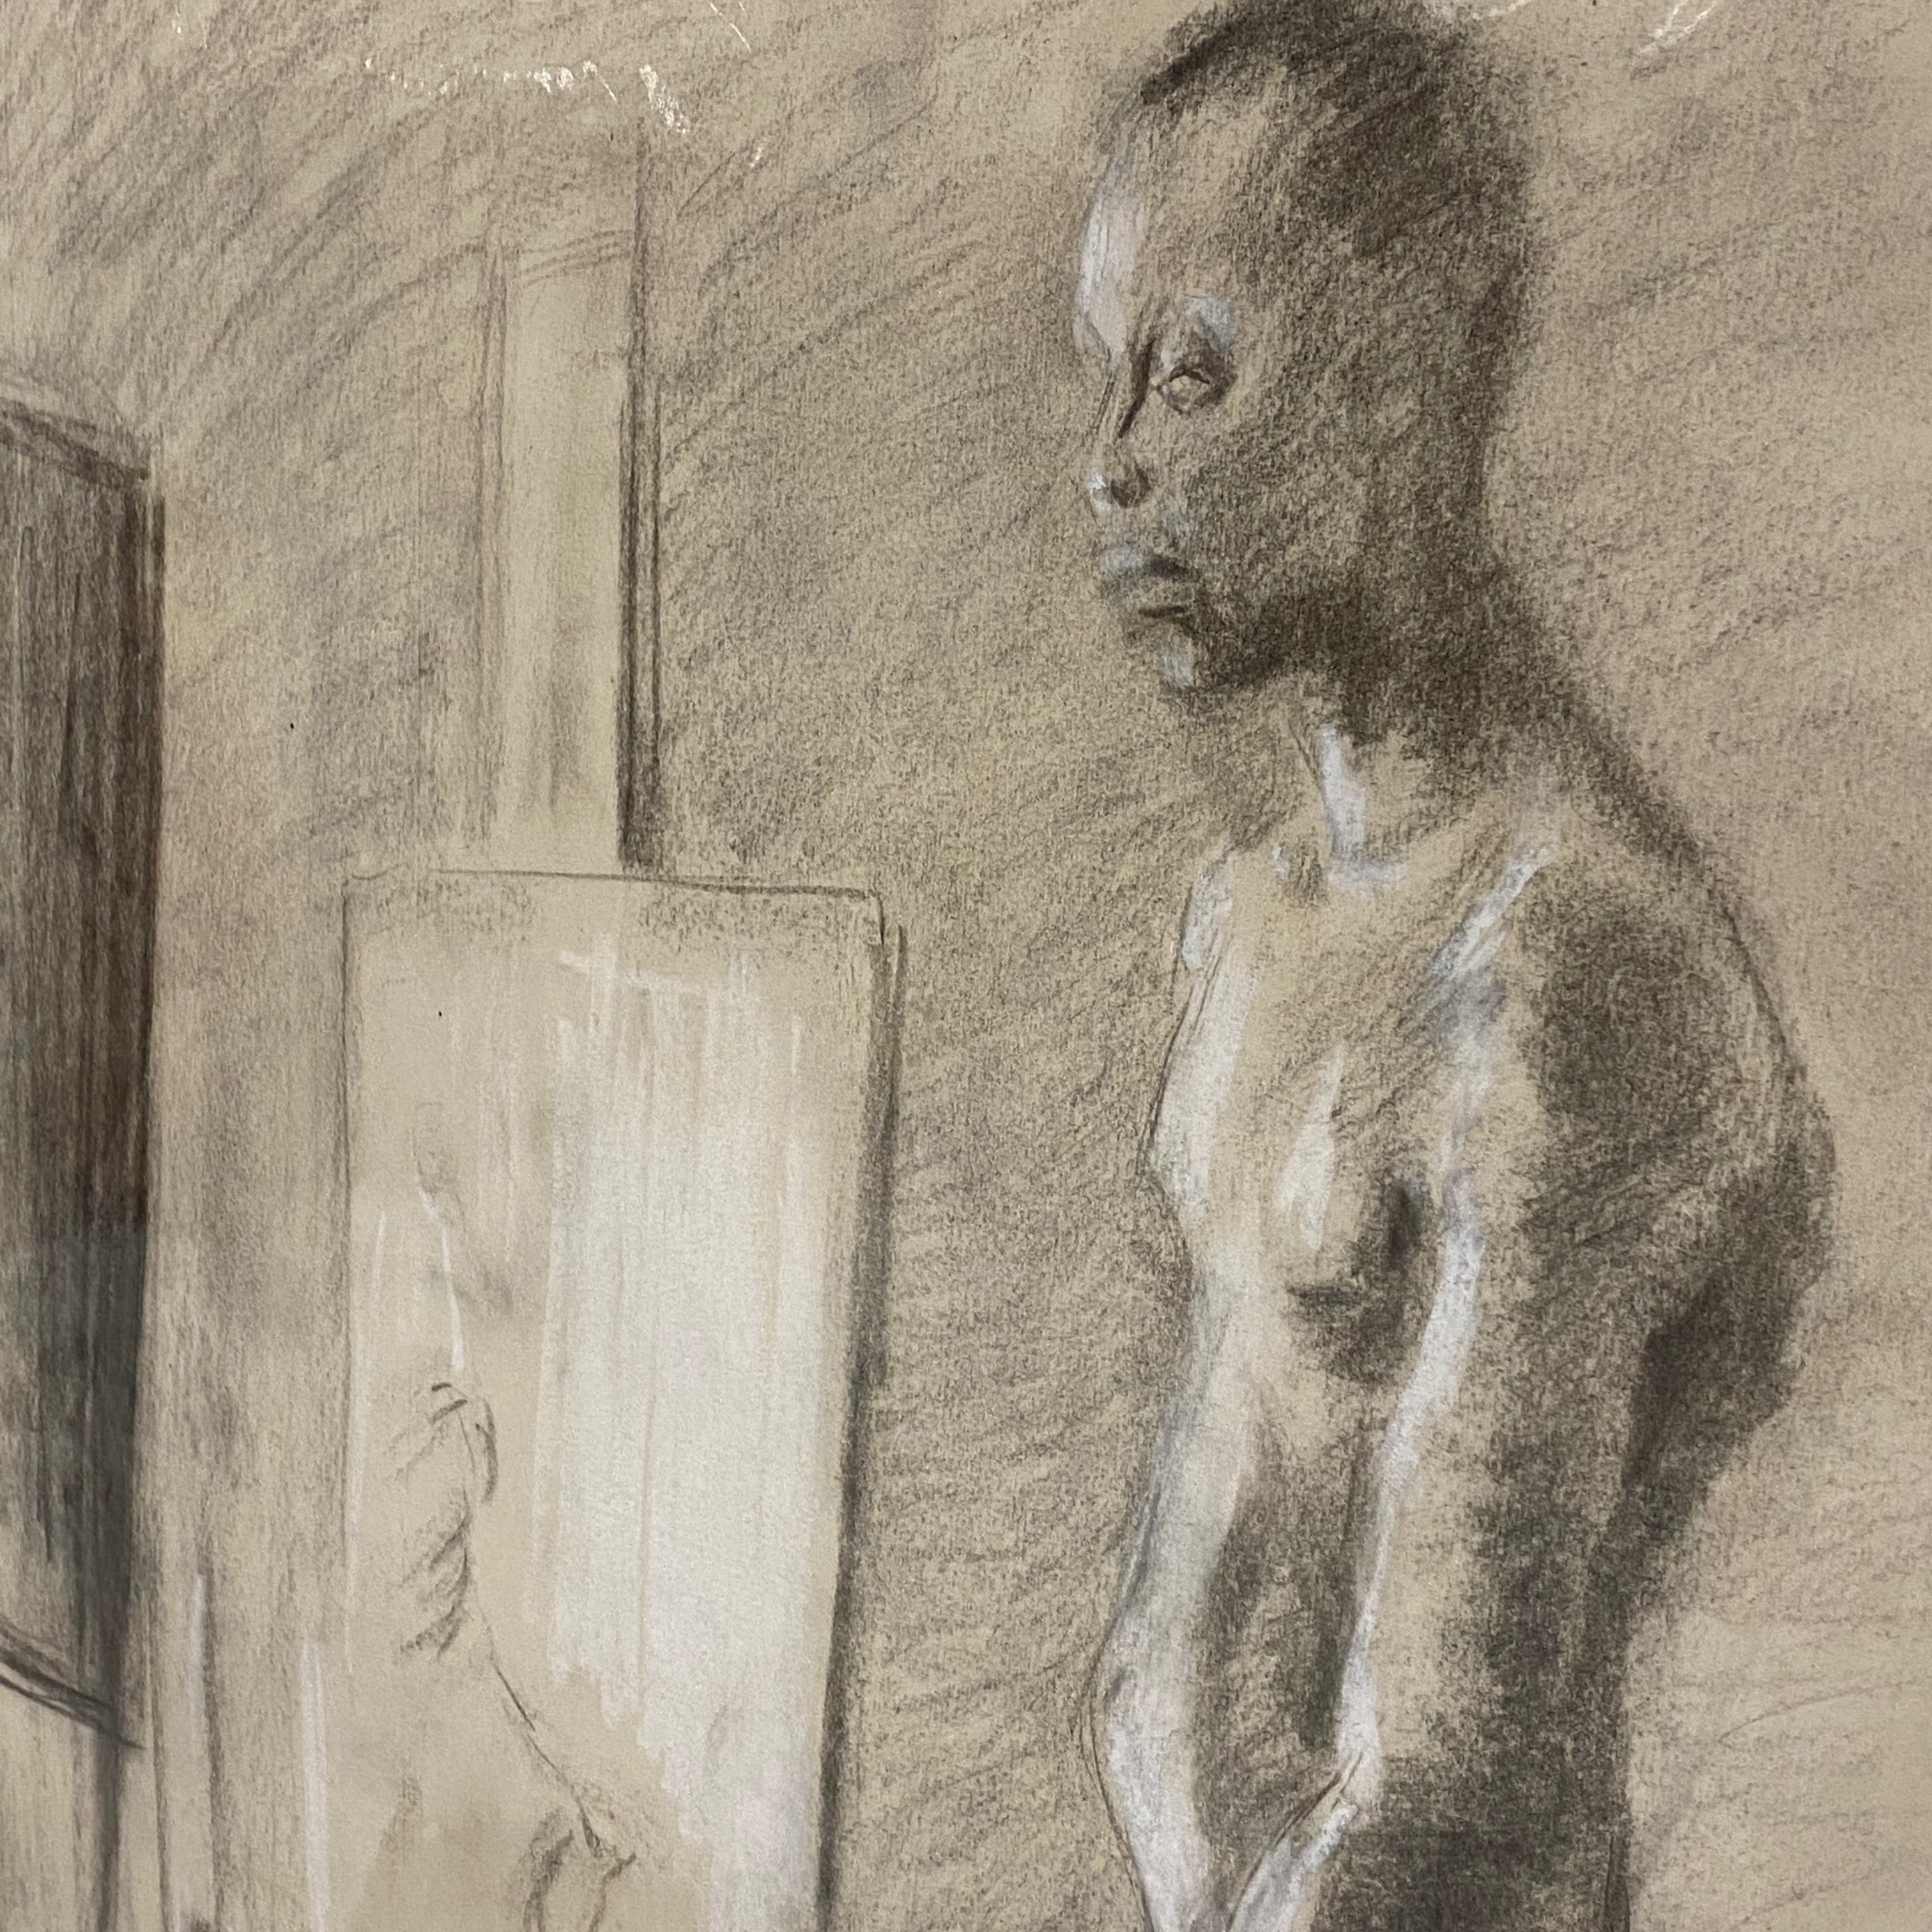 African American Charcoal Drawing from 1970s